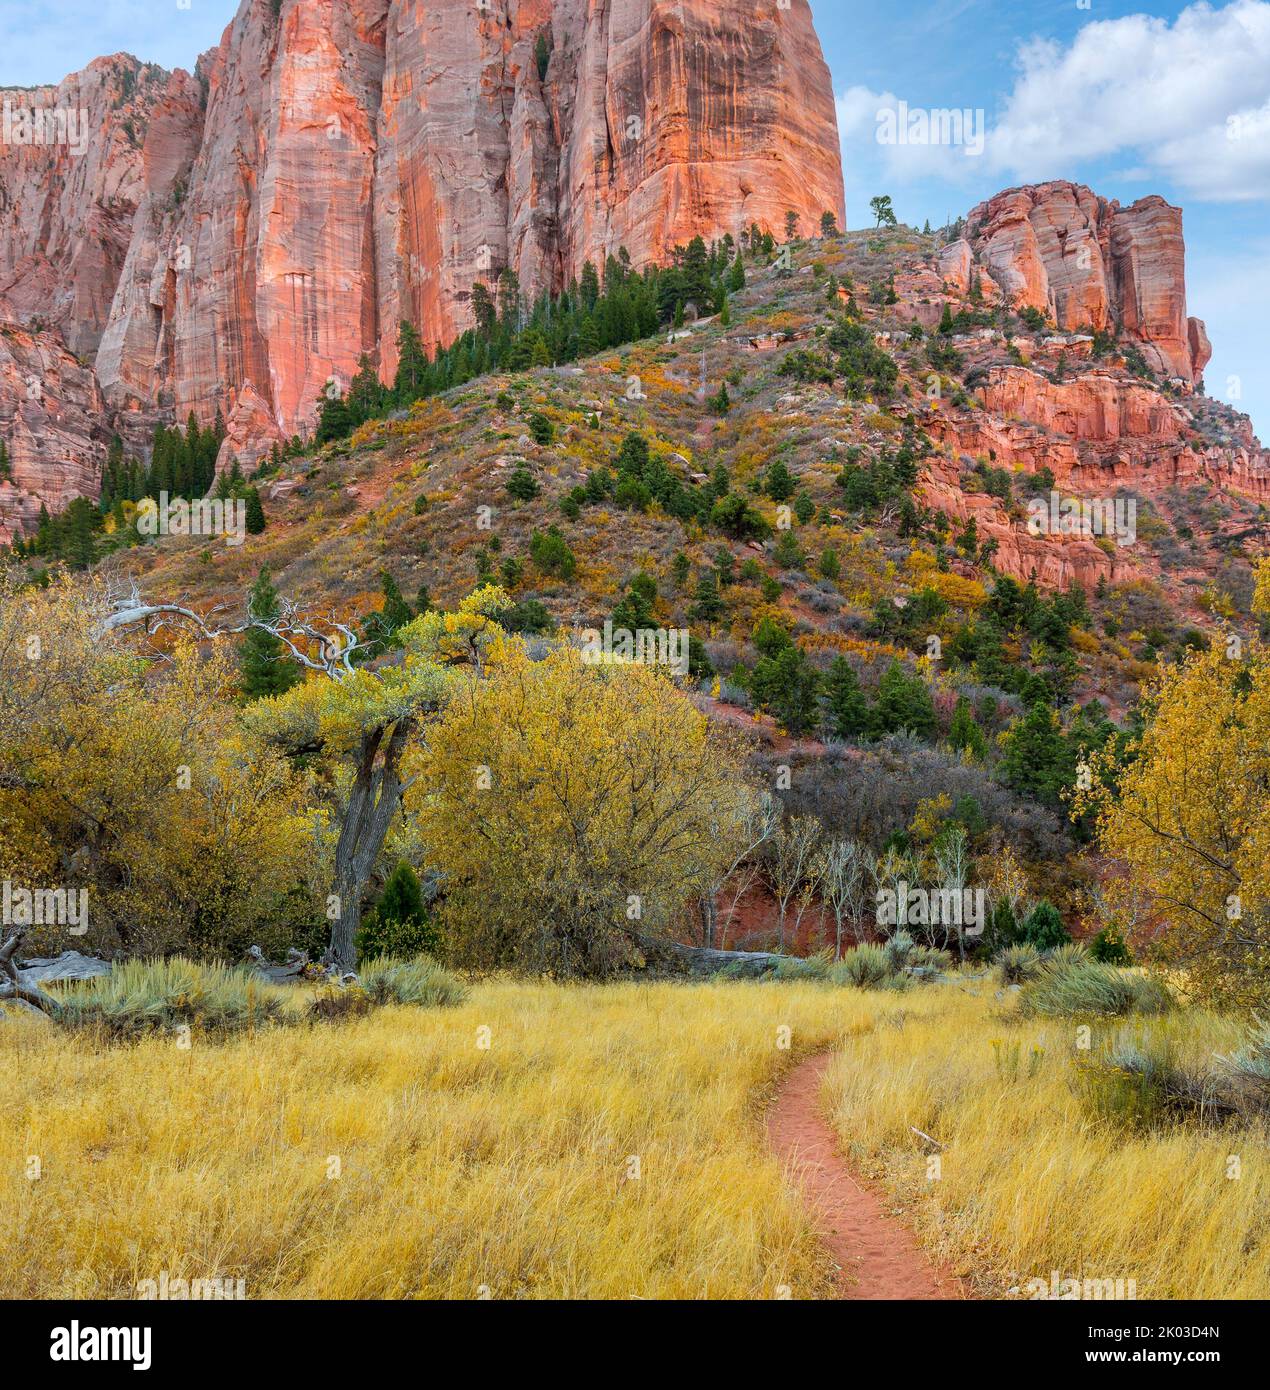 Zion National Park is located in southwestern Utah on the border with Arizona. It has an area of 579 kö² and lies between 1128 m and 2660 m altitude. Autumn landscape at La Verkin Creek Trail near Shuntavi Butte, Timber Top Mountain. Stock Photo